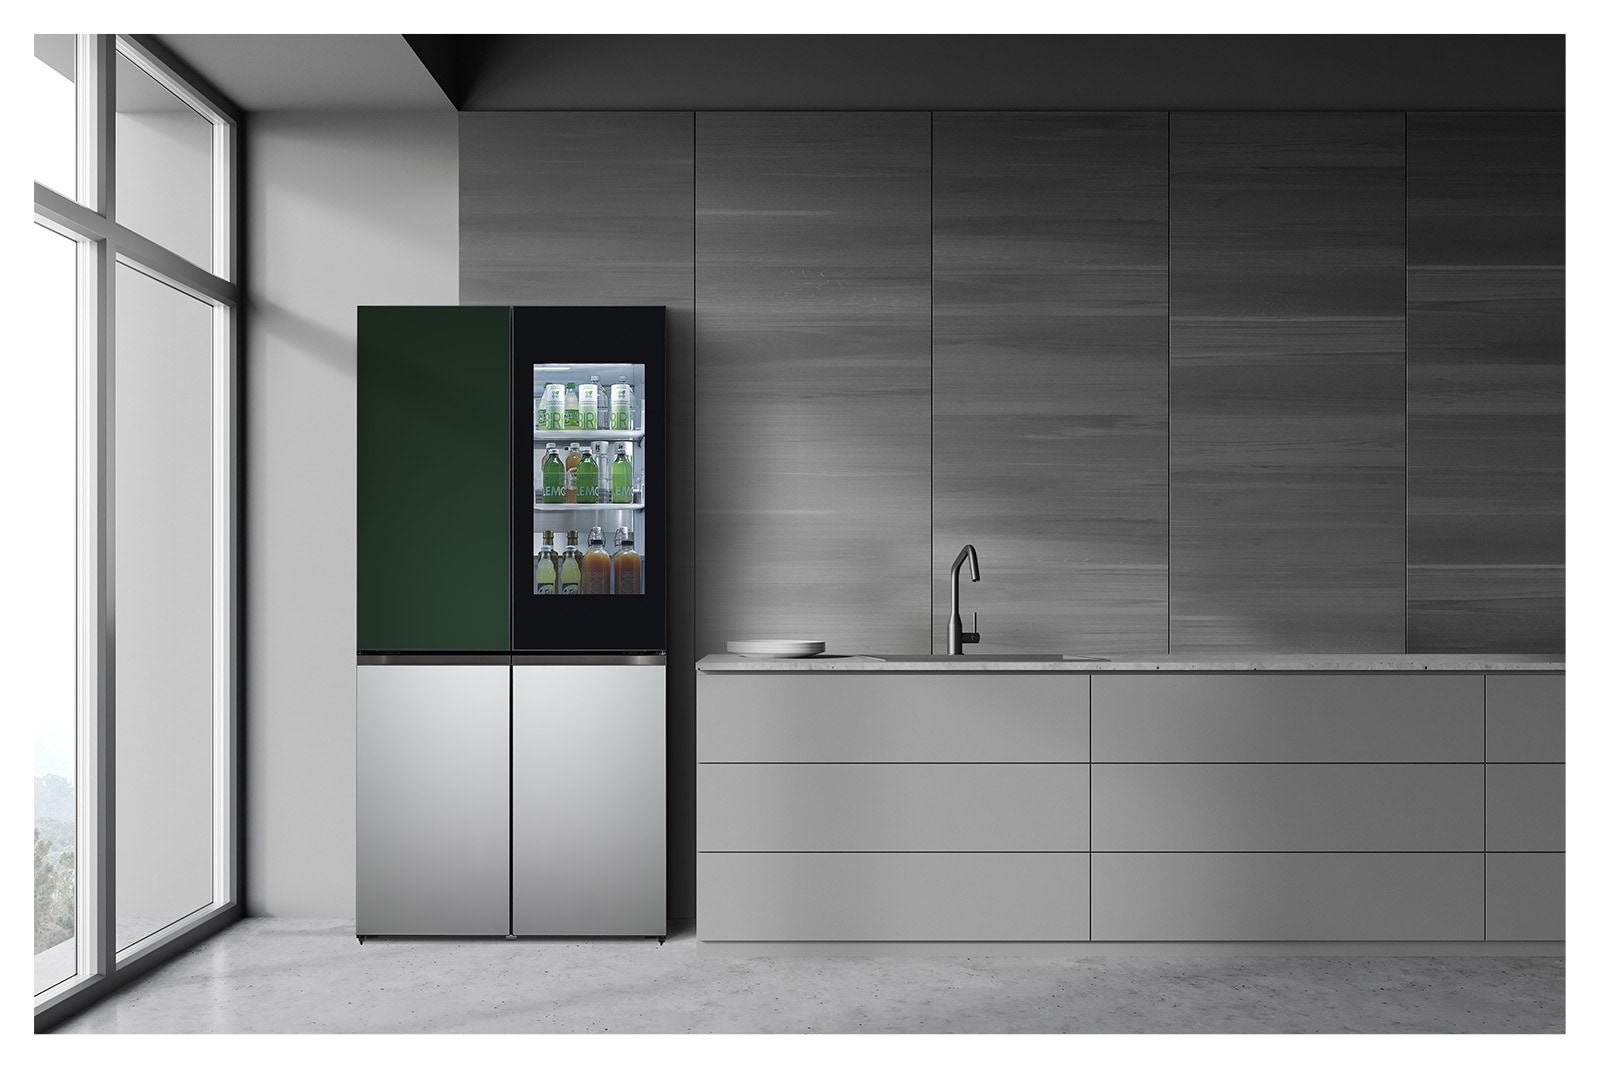 It shows solid green&silver color LG French Door Objet Collection is placed in a dark-tone modern kitchen.